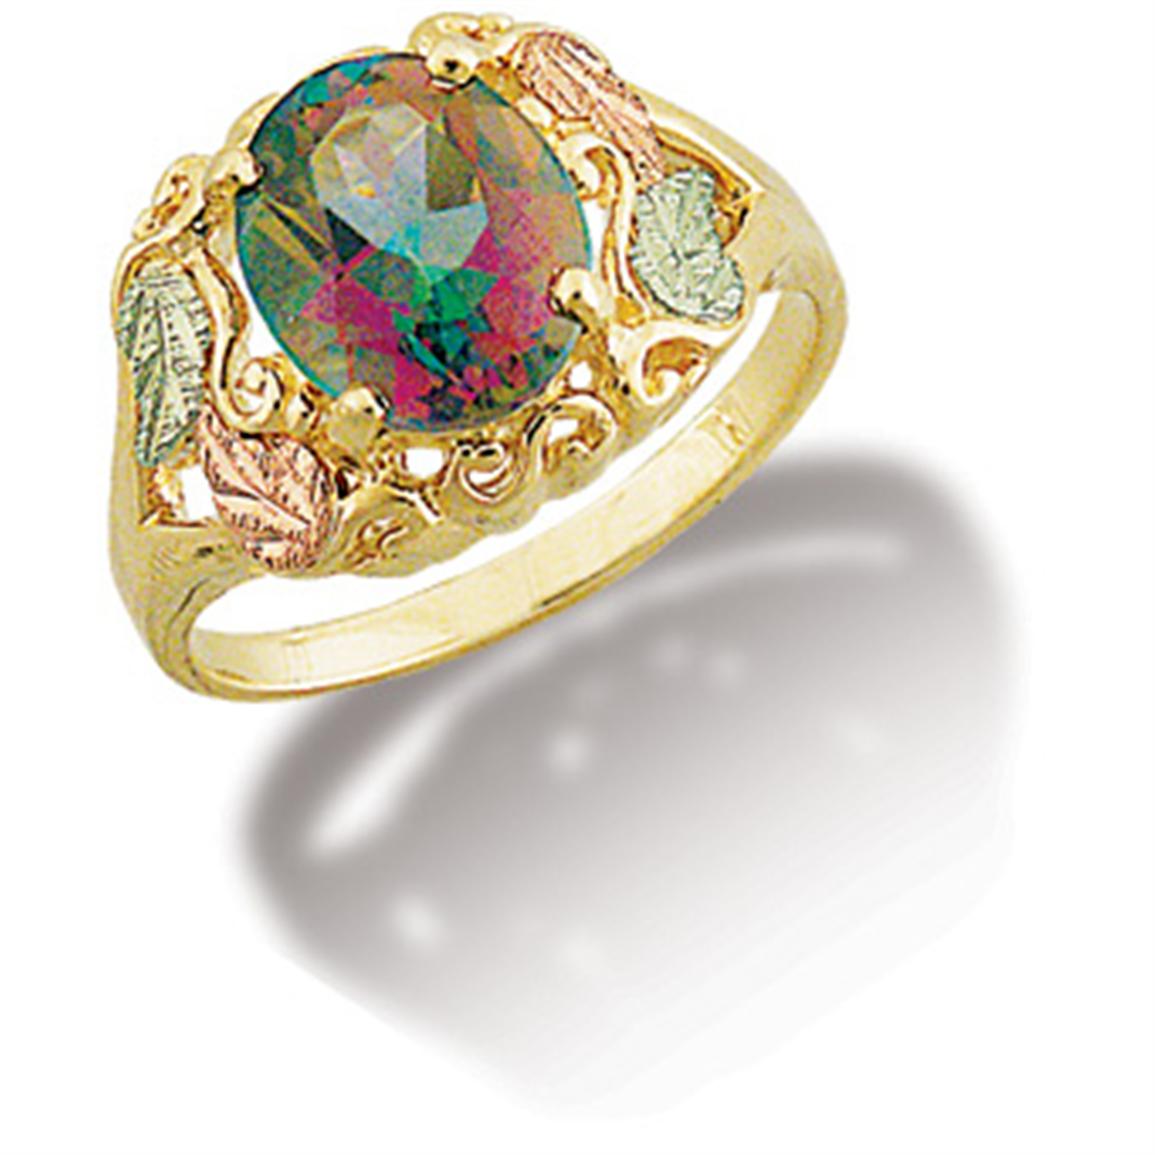 Women's Landstrom's® Mystic Fire Topaz Ring 117302, Jewelry at